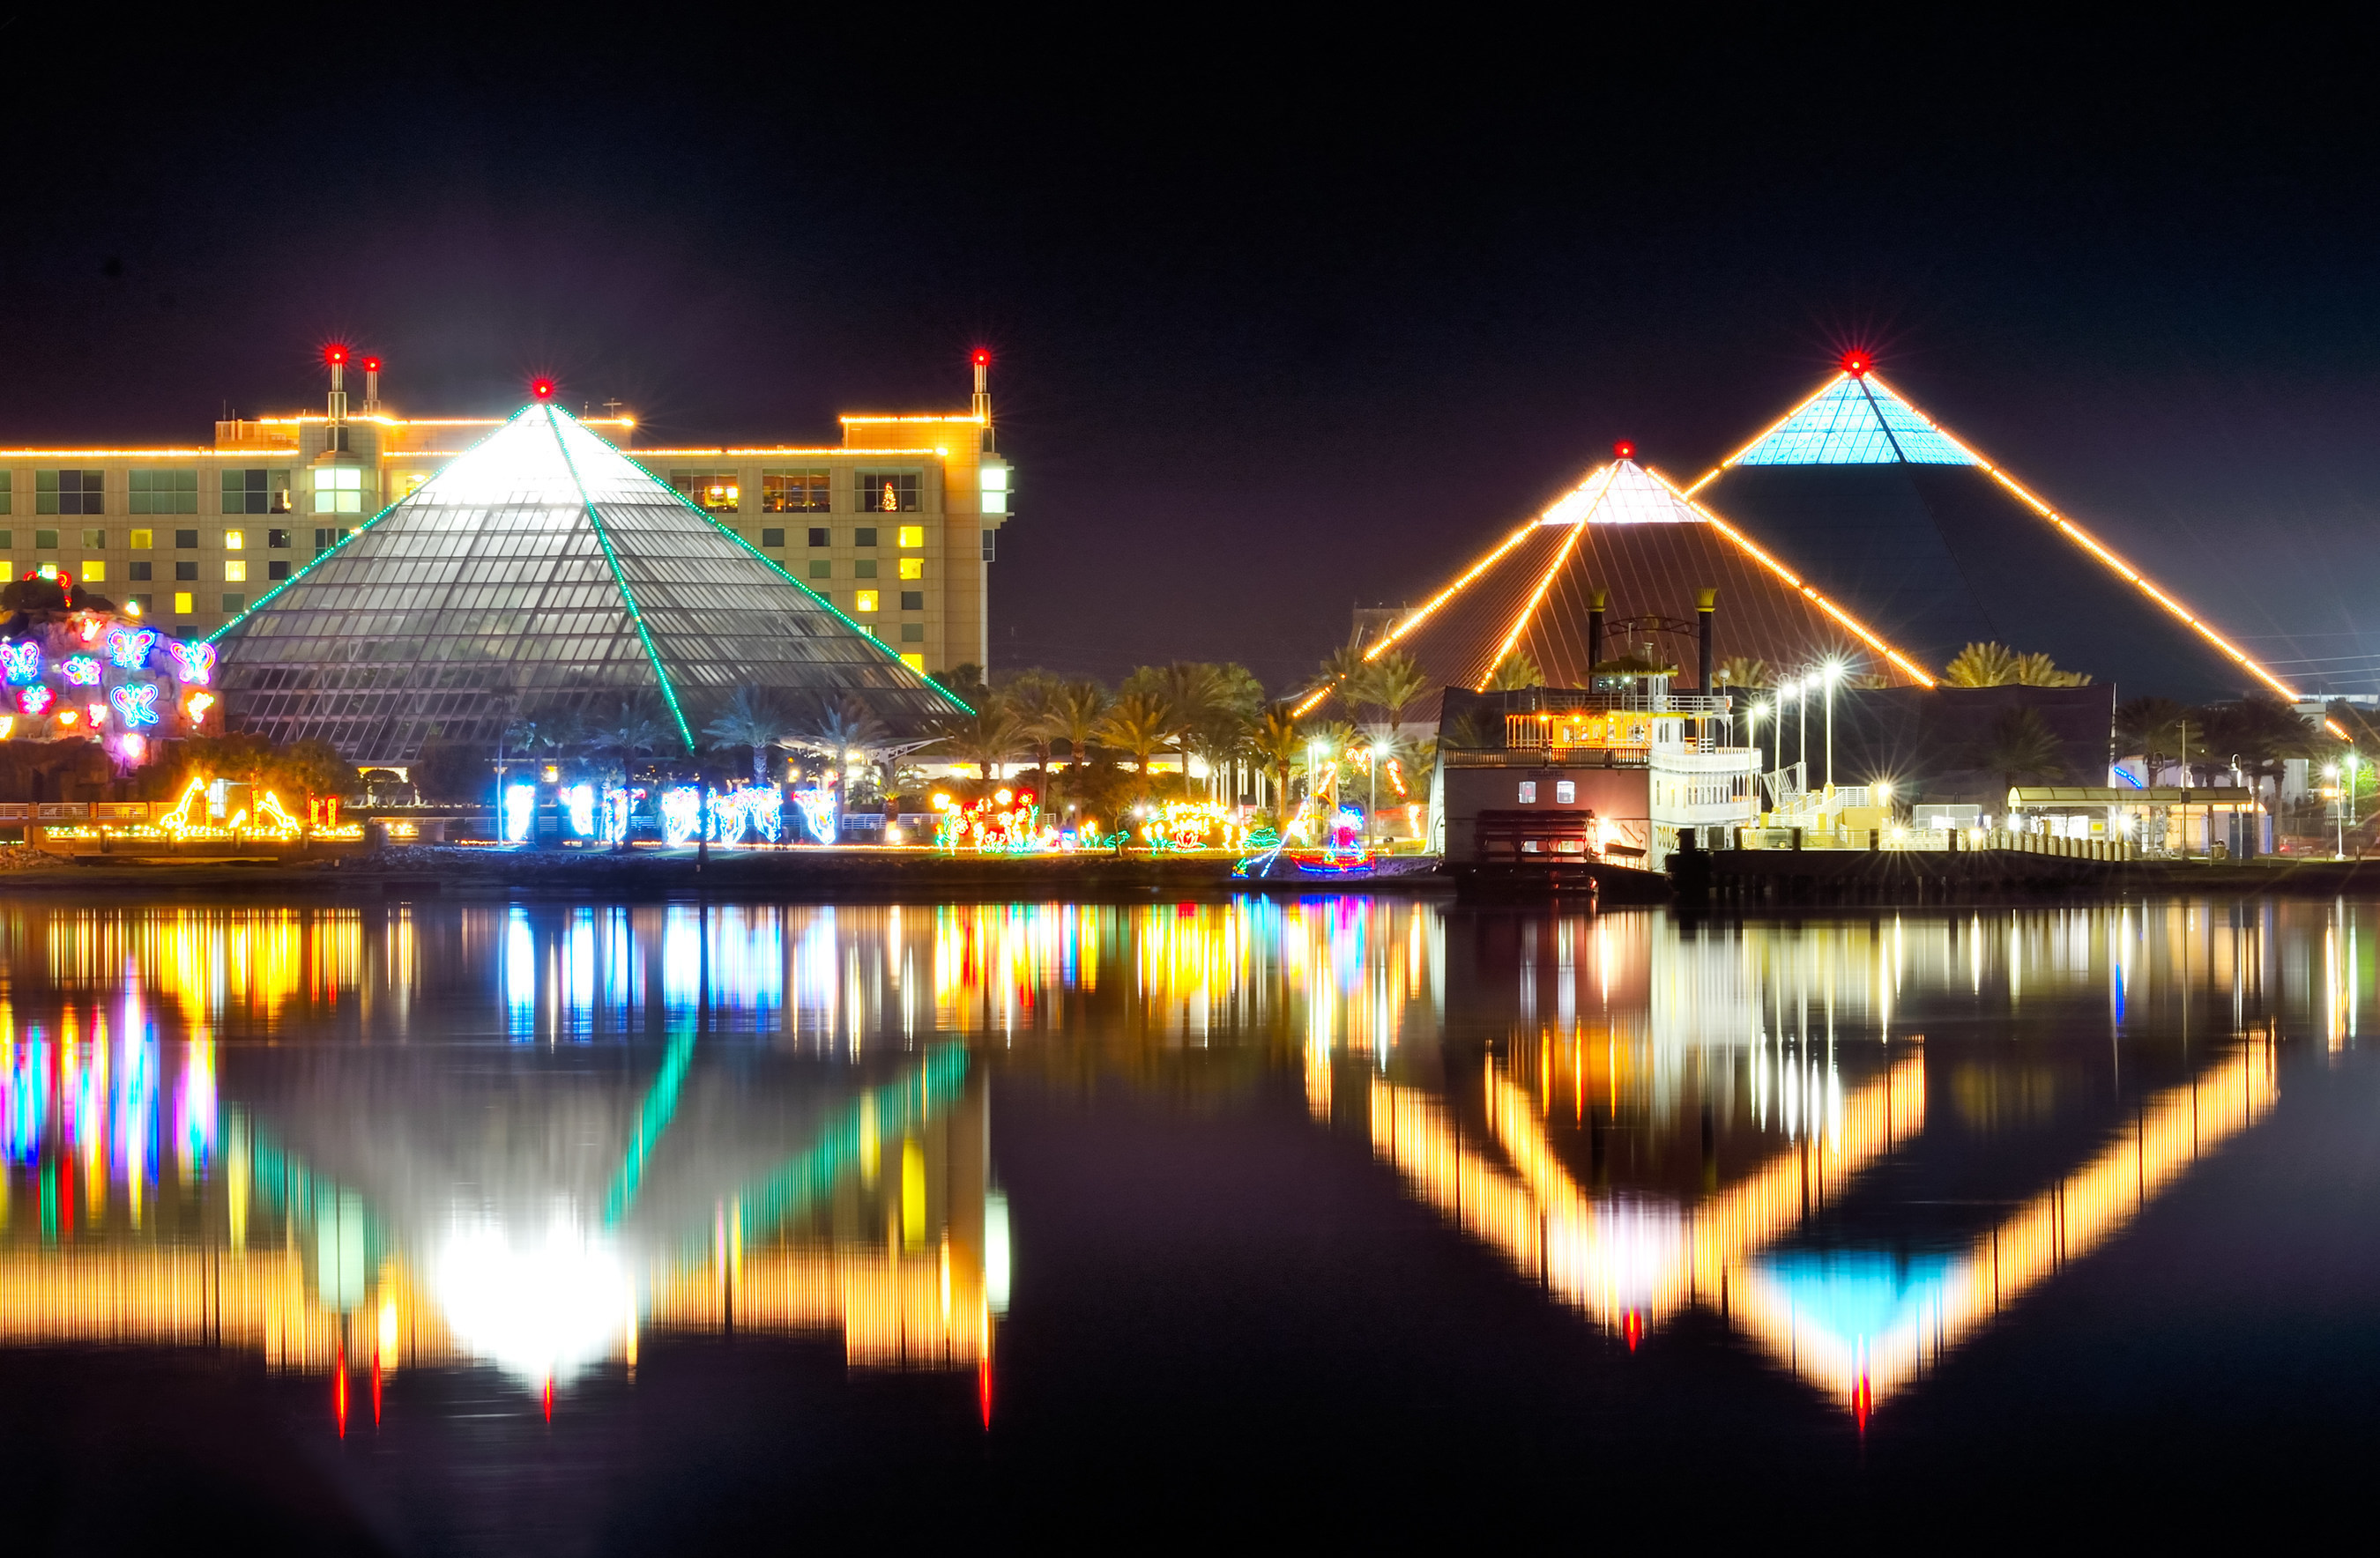 Festival of Lights opened Saturday with an impressive crowd at Moody Gardens in Galveston, TX